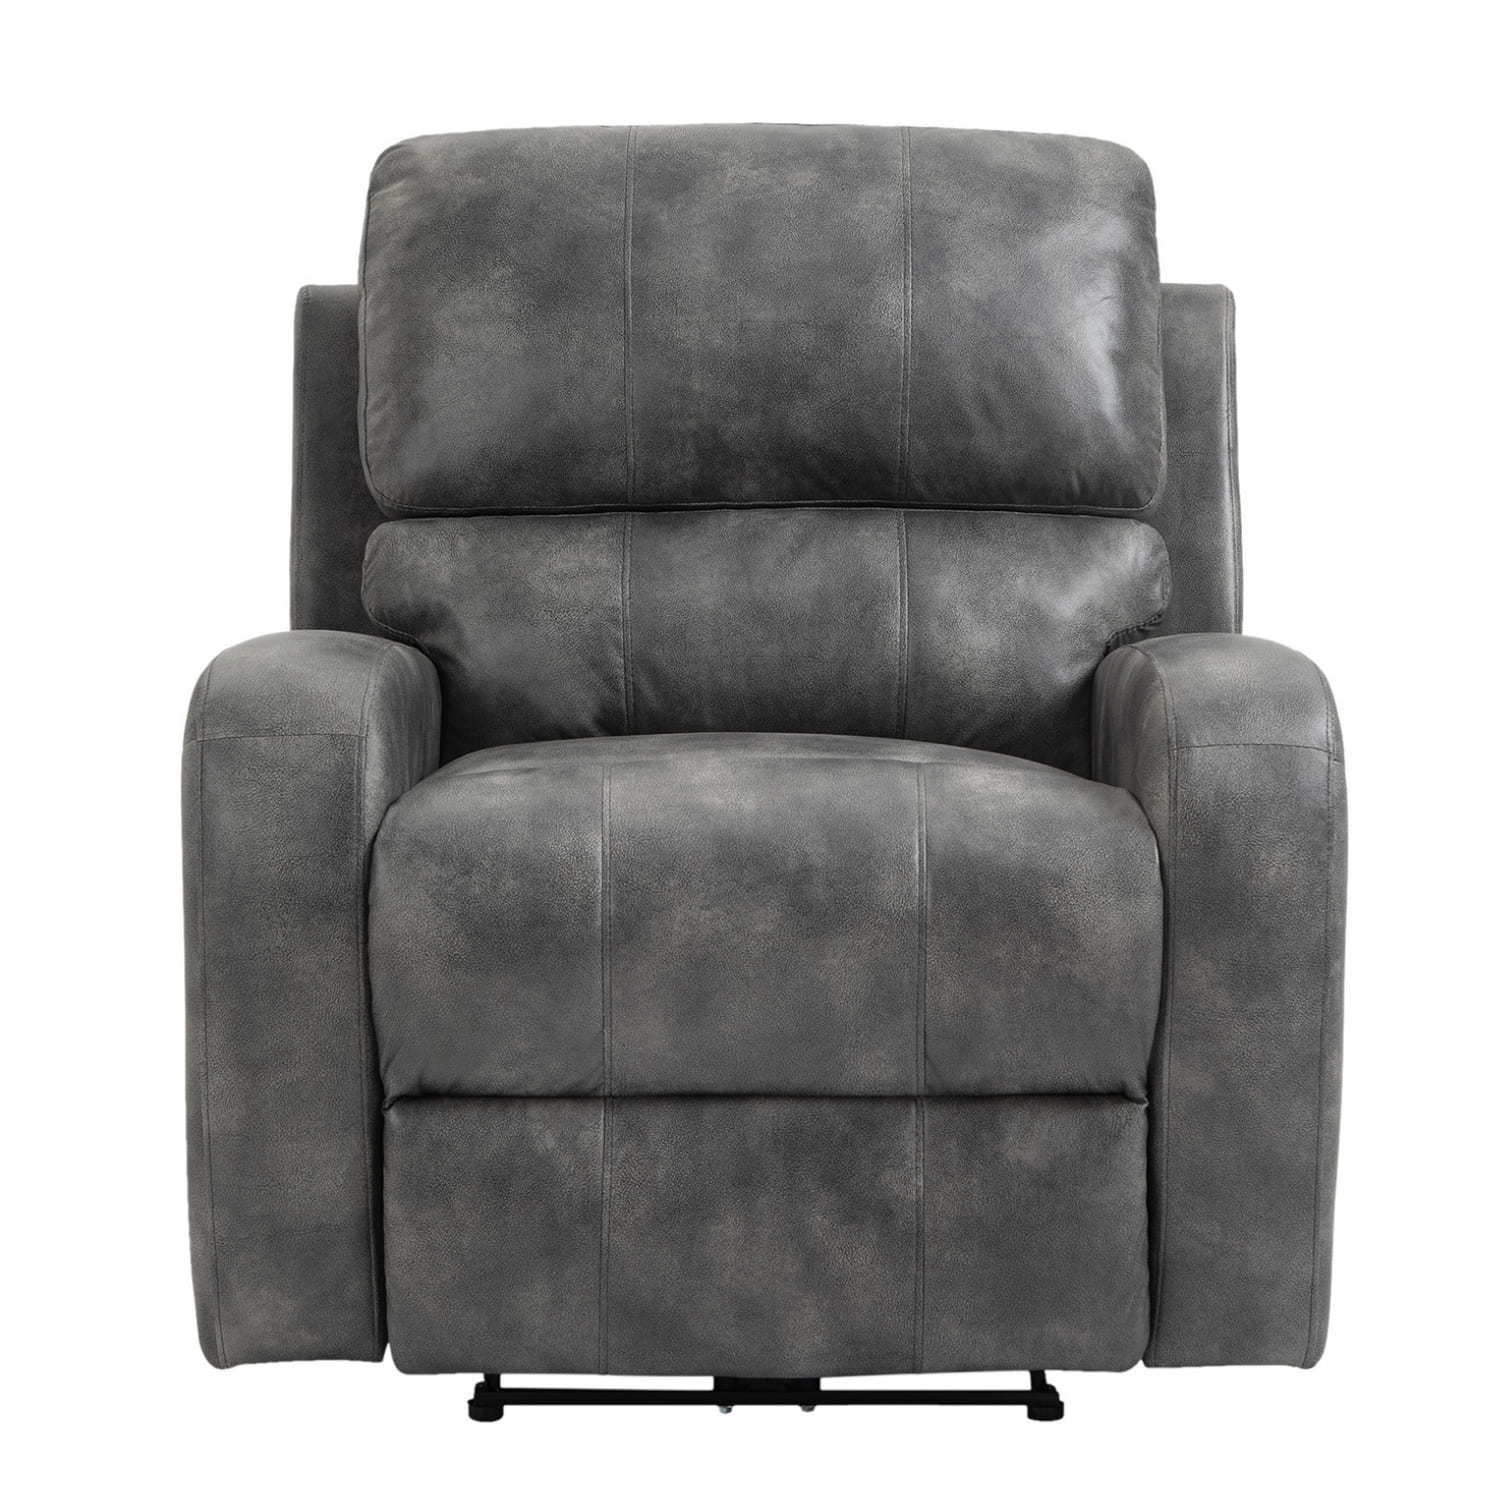 Boyel Living Overstuffed Electric Recliner Chair with USB Charge, Gray/Brown/Black-Boyel Living